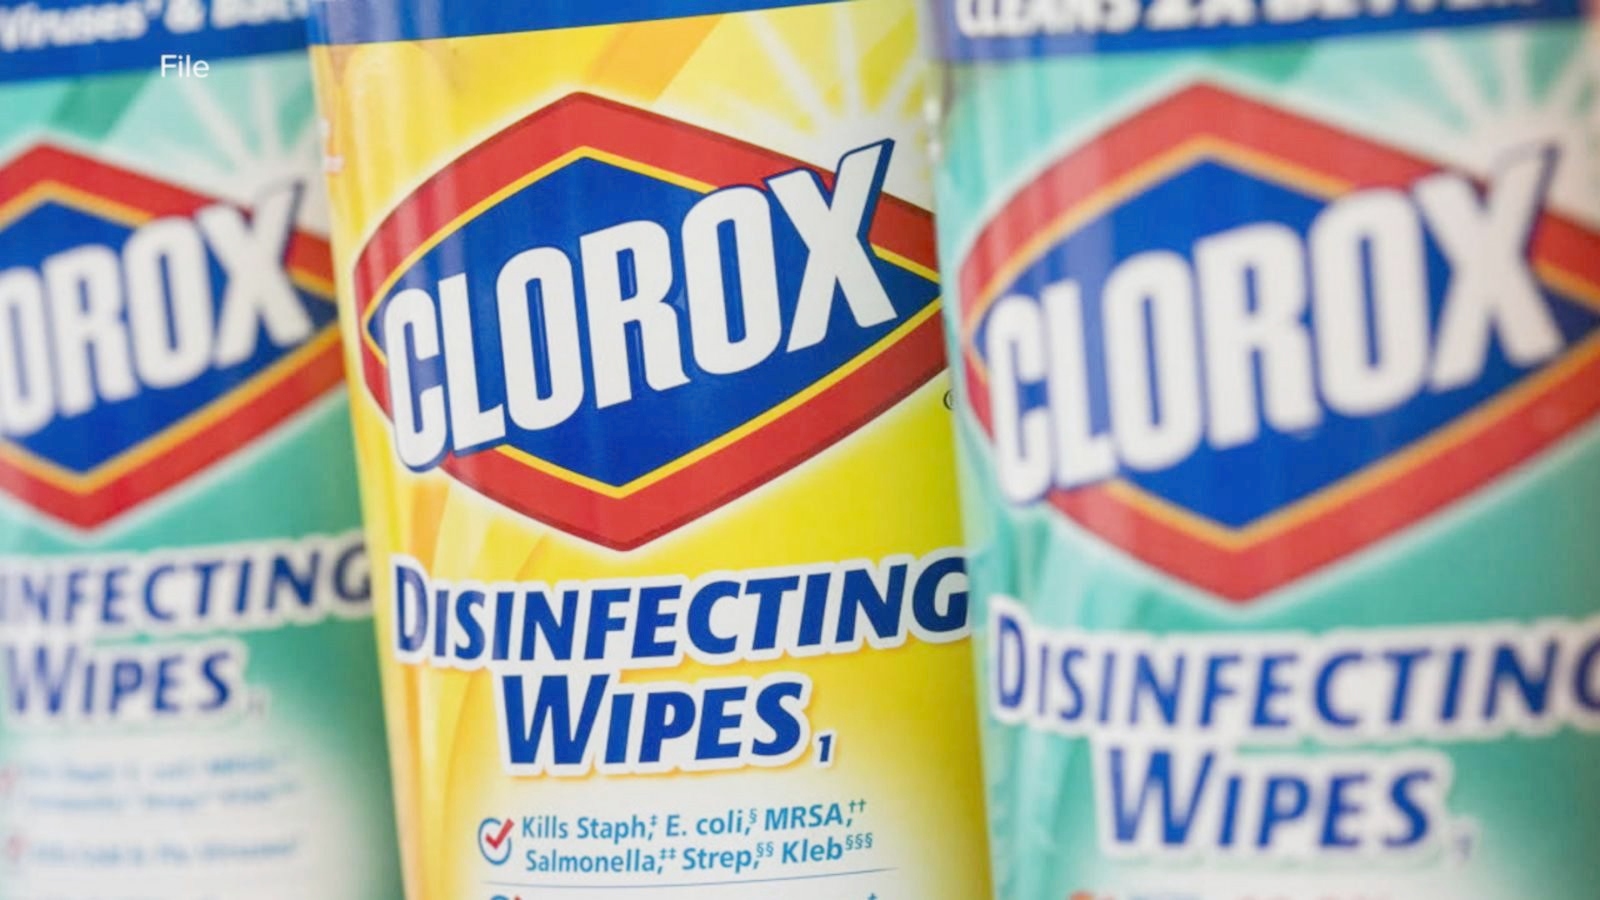 A cyberattack at Clorox caused wide-scale disruption of their operations and its ability to make its cleaning materials, Clorox said Monday.